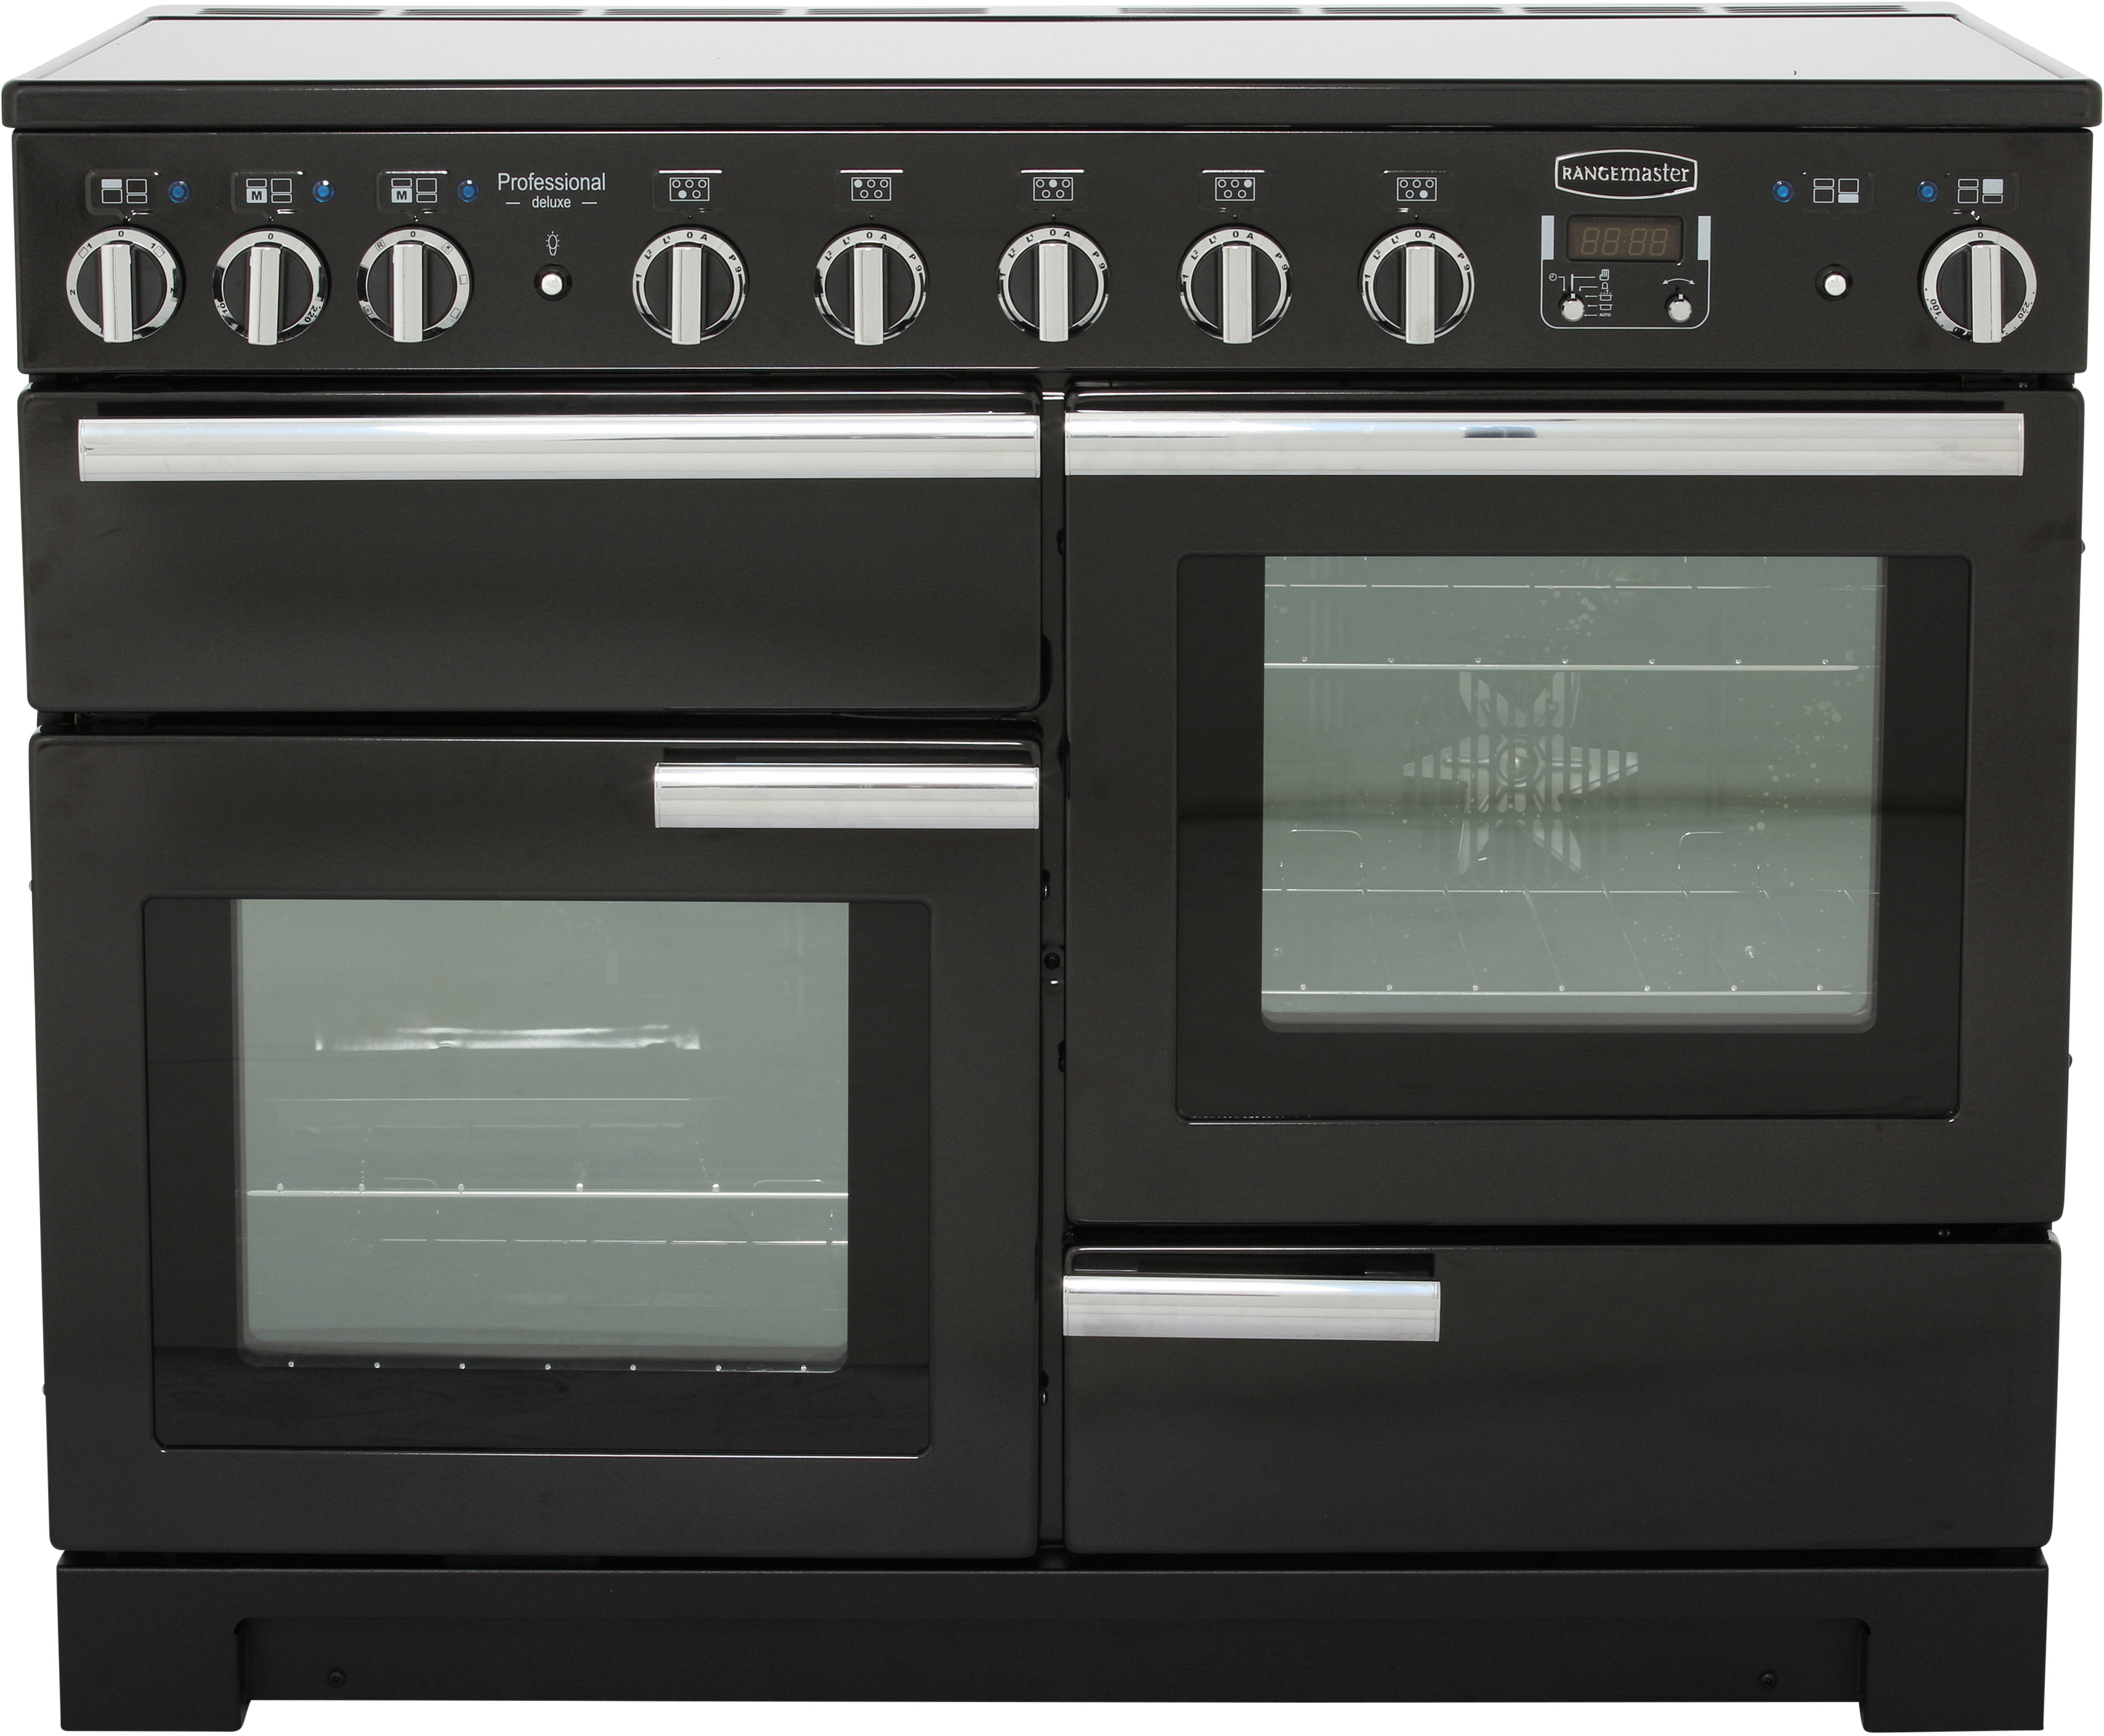 Rangemaster Professional Deluxe PDL110EIGB/C 110cm Electric Range Cooker with Induction Hob - Black / Chrome - A/A Rated, Black